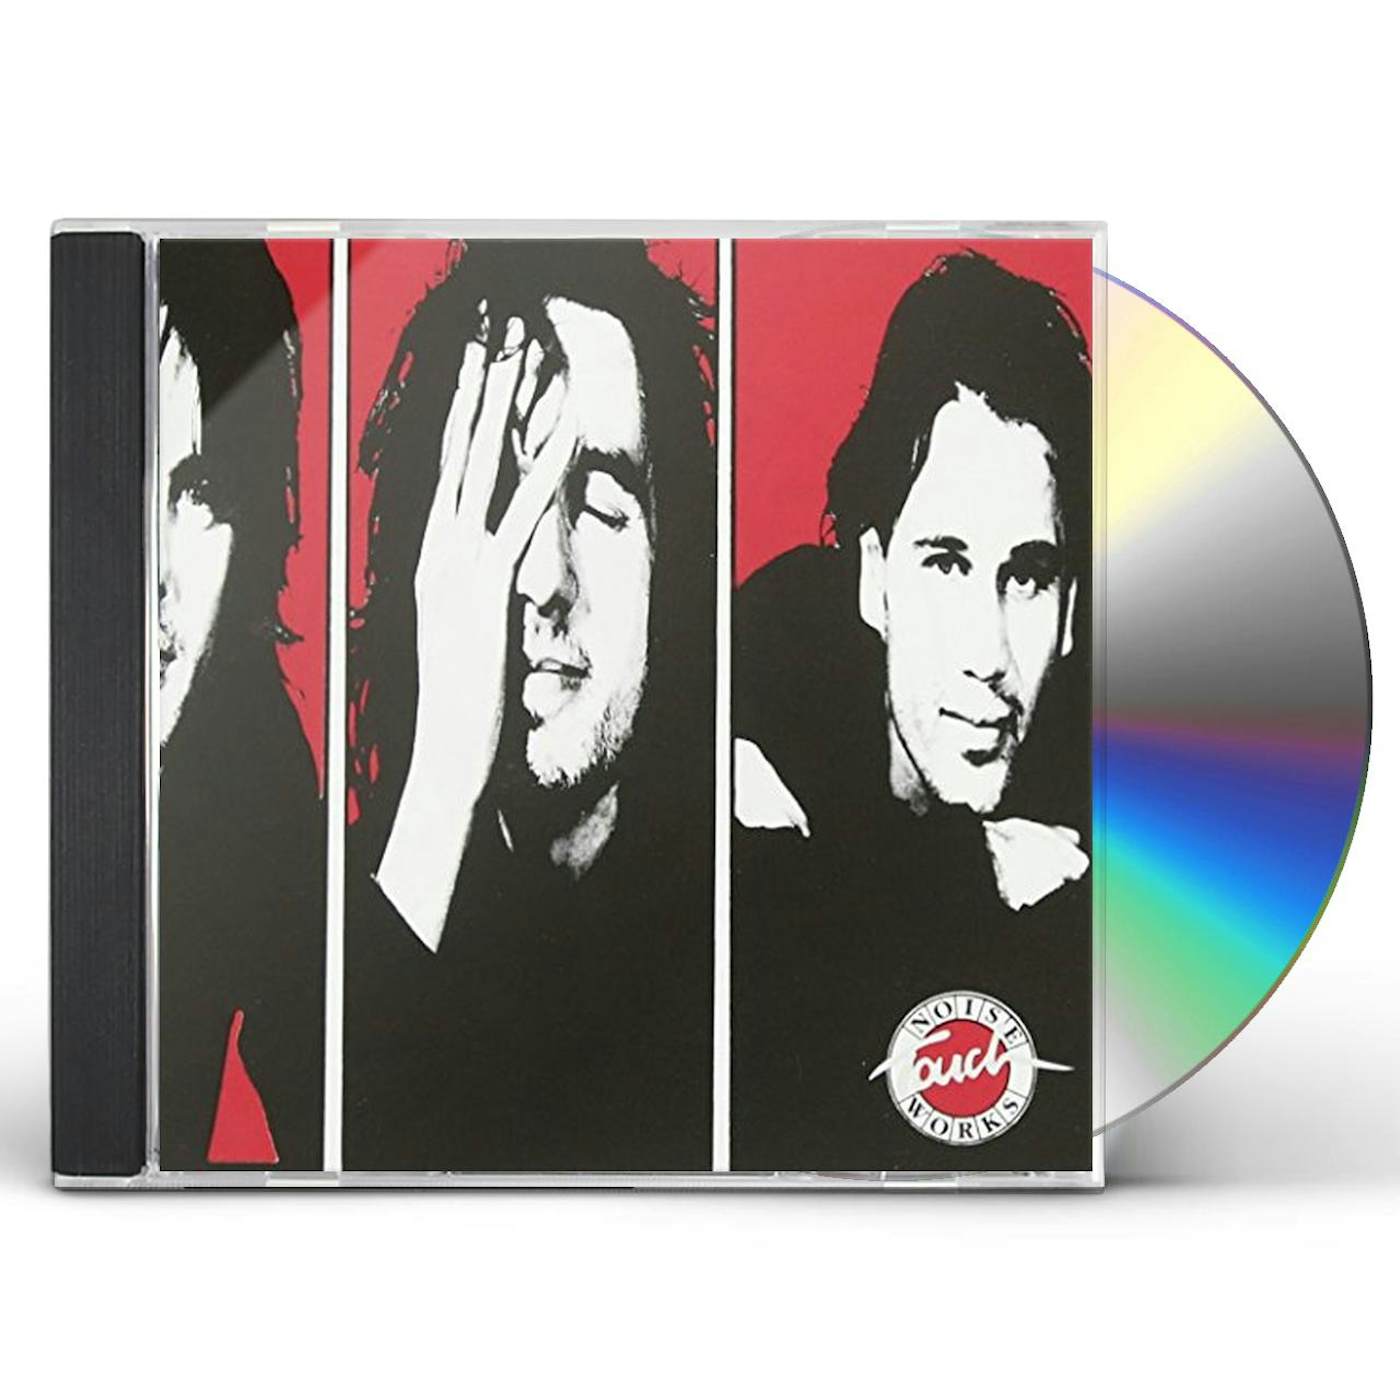 Noiseworks TOUCH (GOLD SERIES) CD